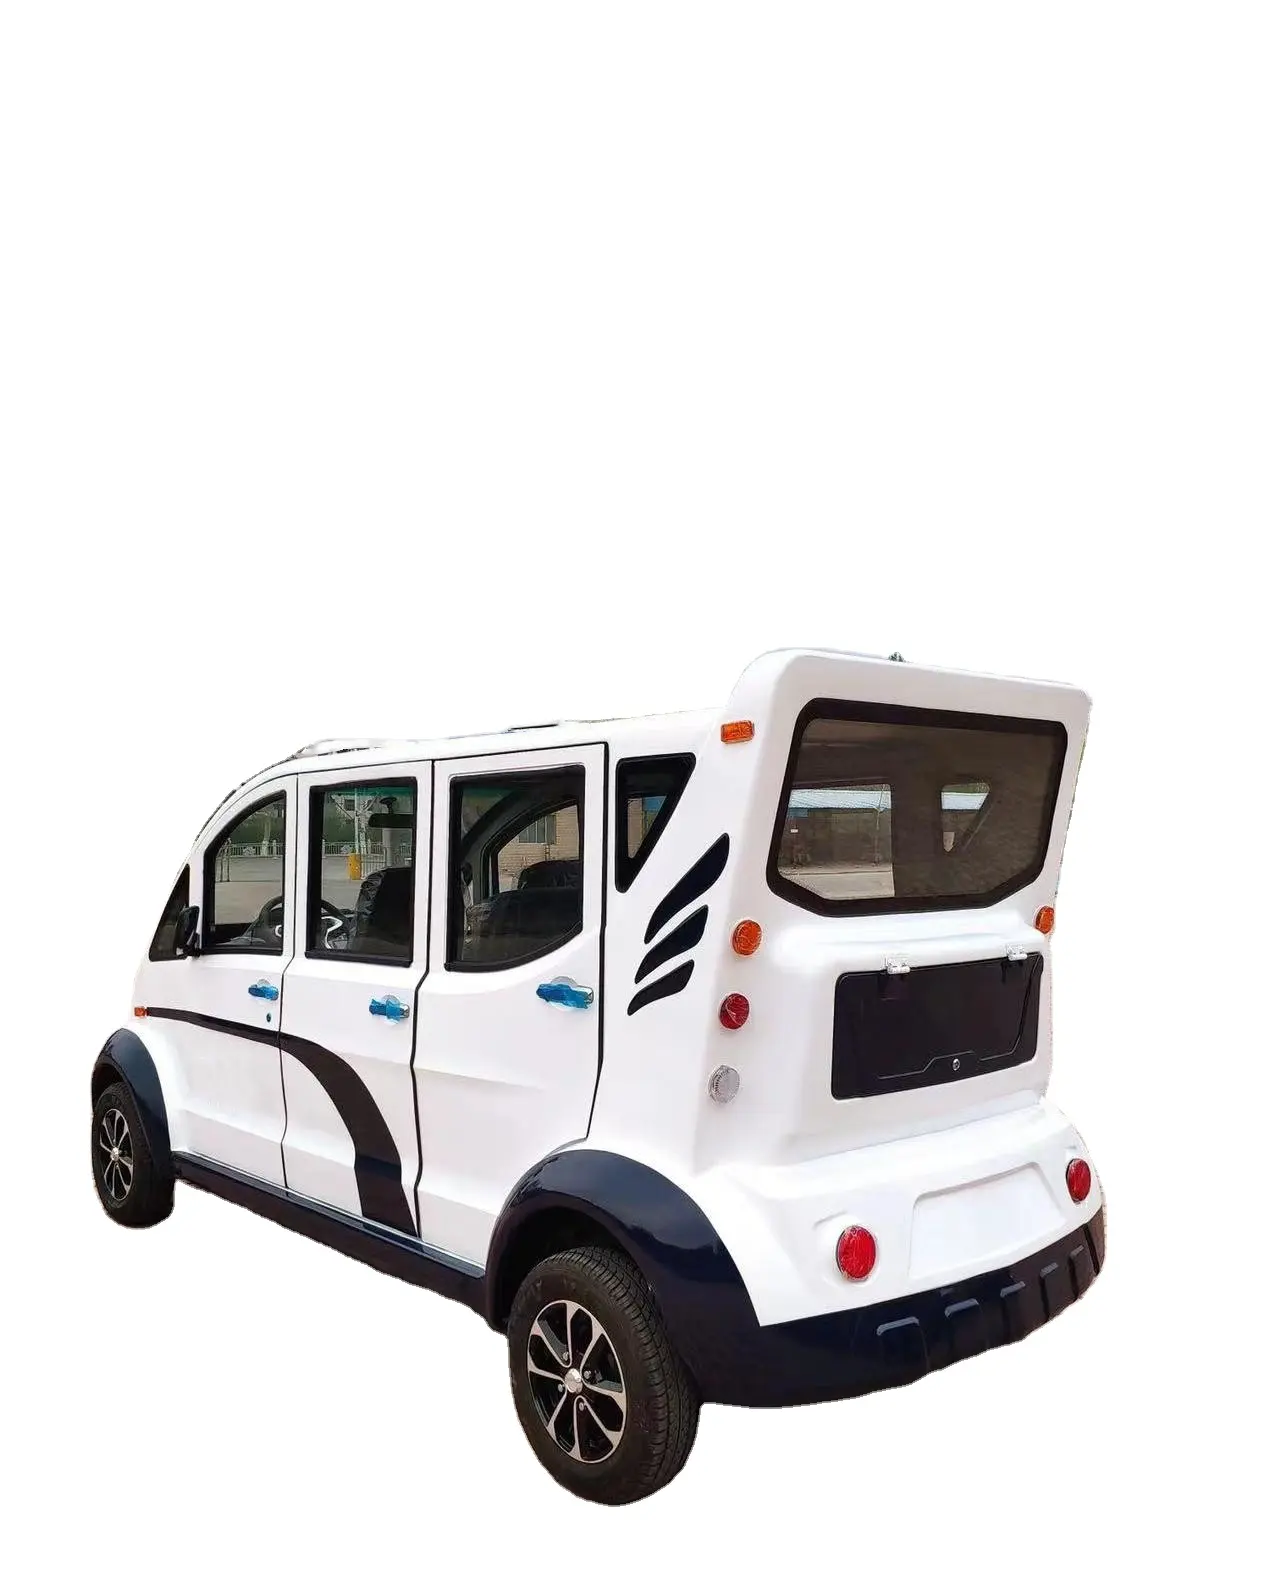 WELIFTRICH factory sell CE Street Electric Fuel Patrol Cart Small Mini 8 Passengers Vehicle high quality made in china with door